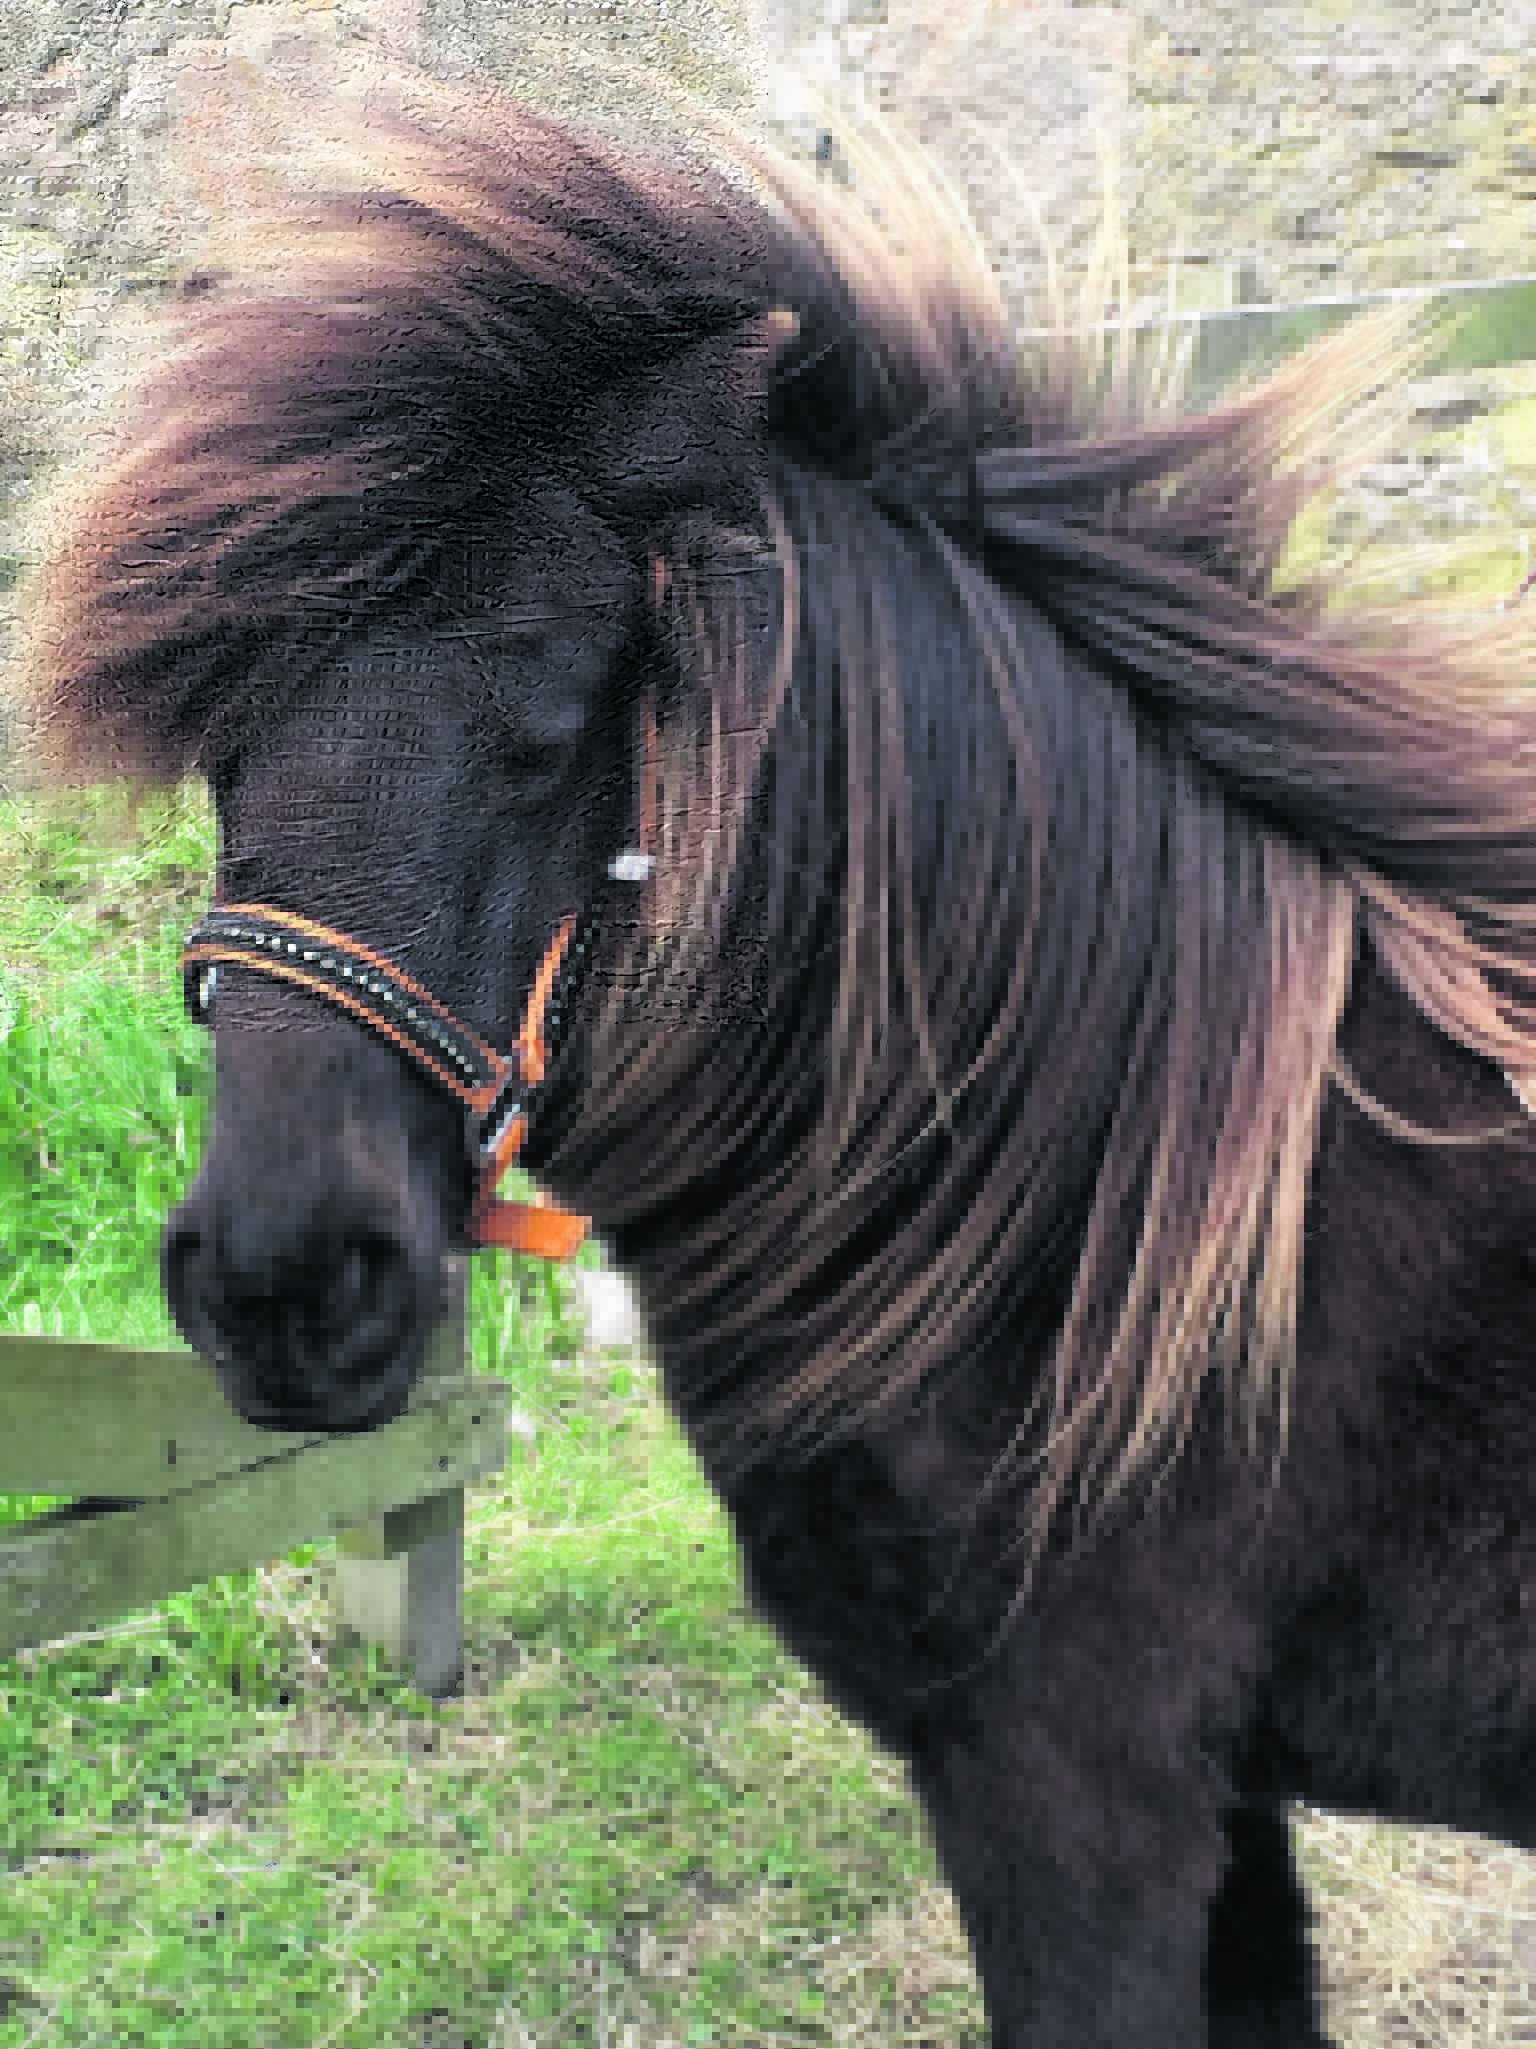 This is Crumpet, she is a six year old Shetland pony rescue.